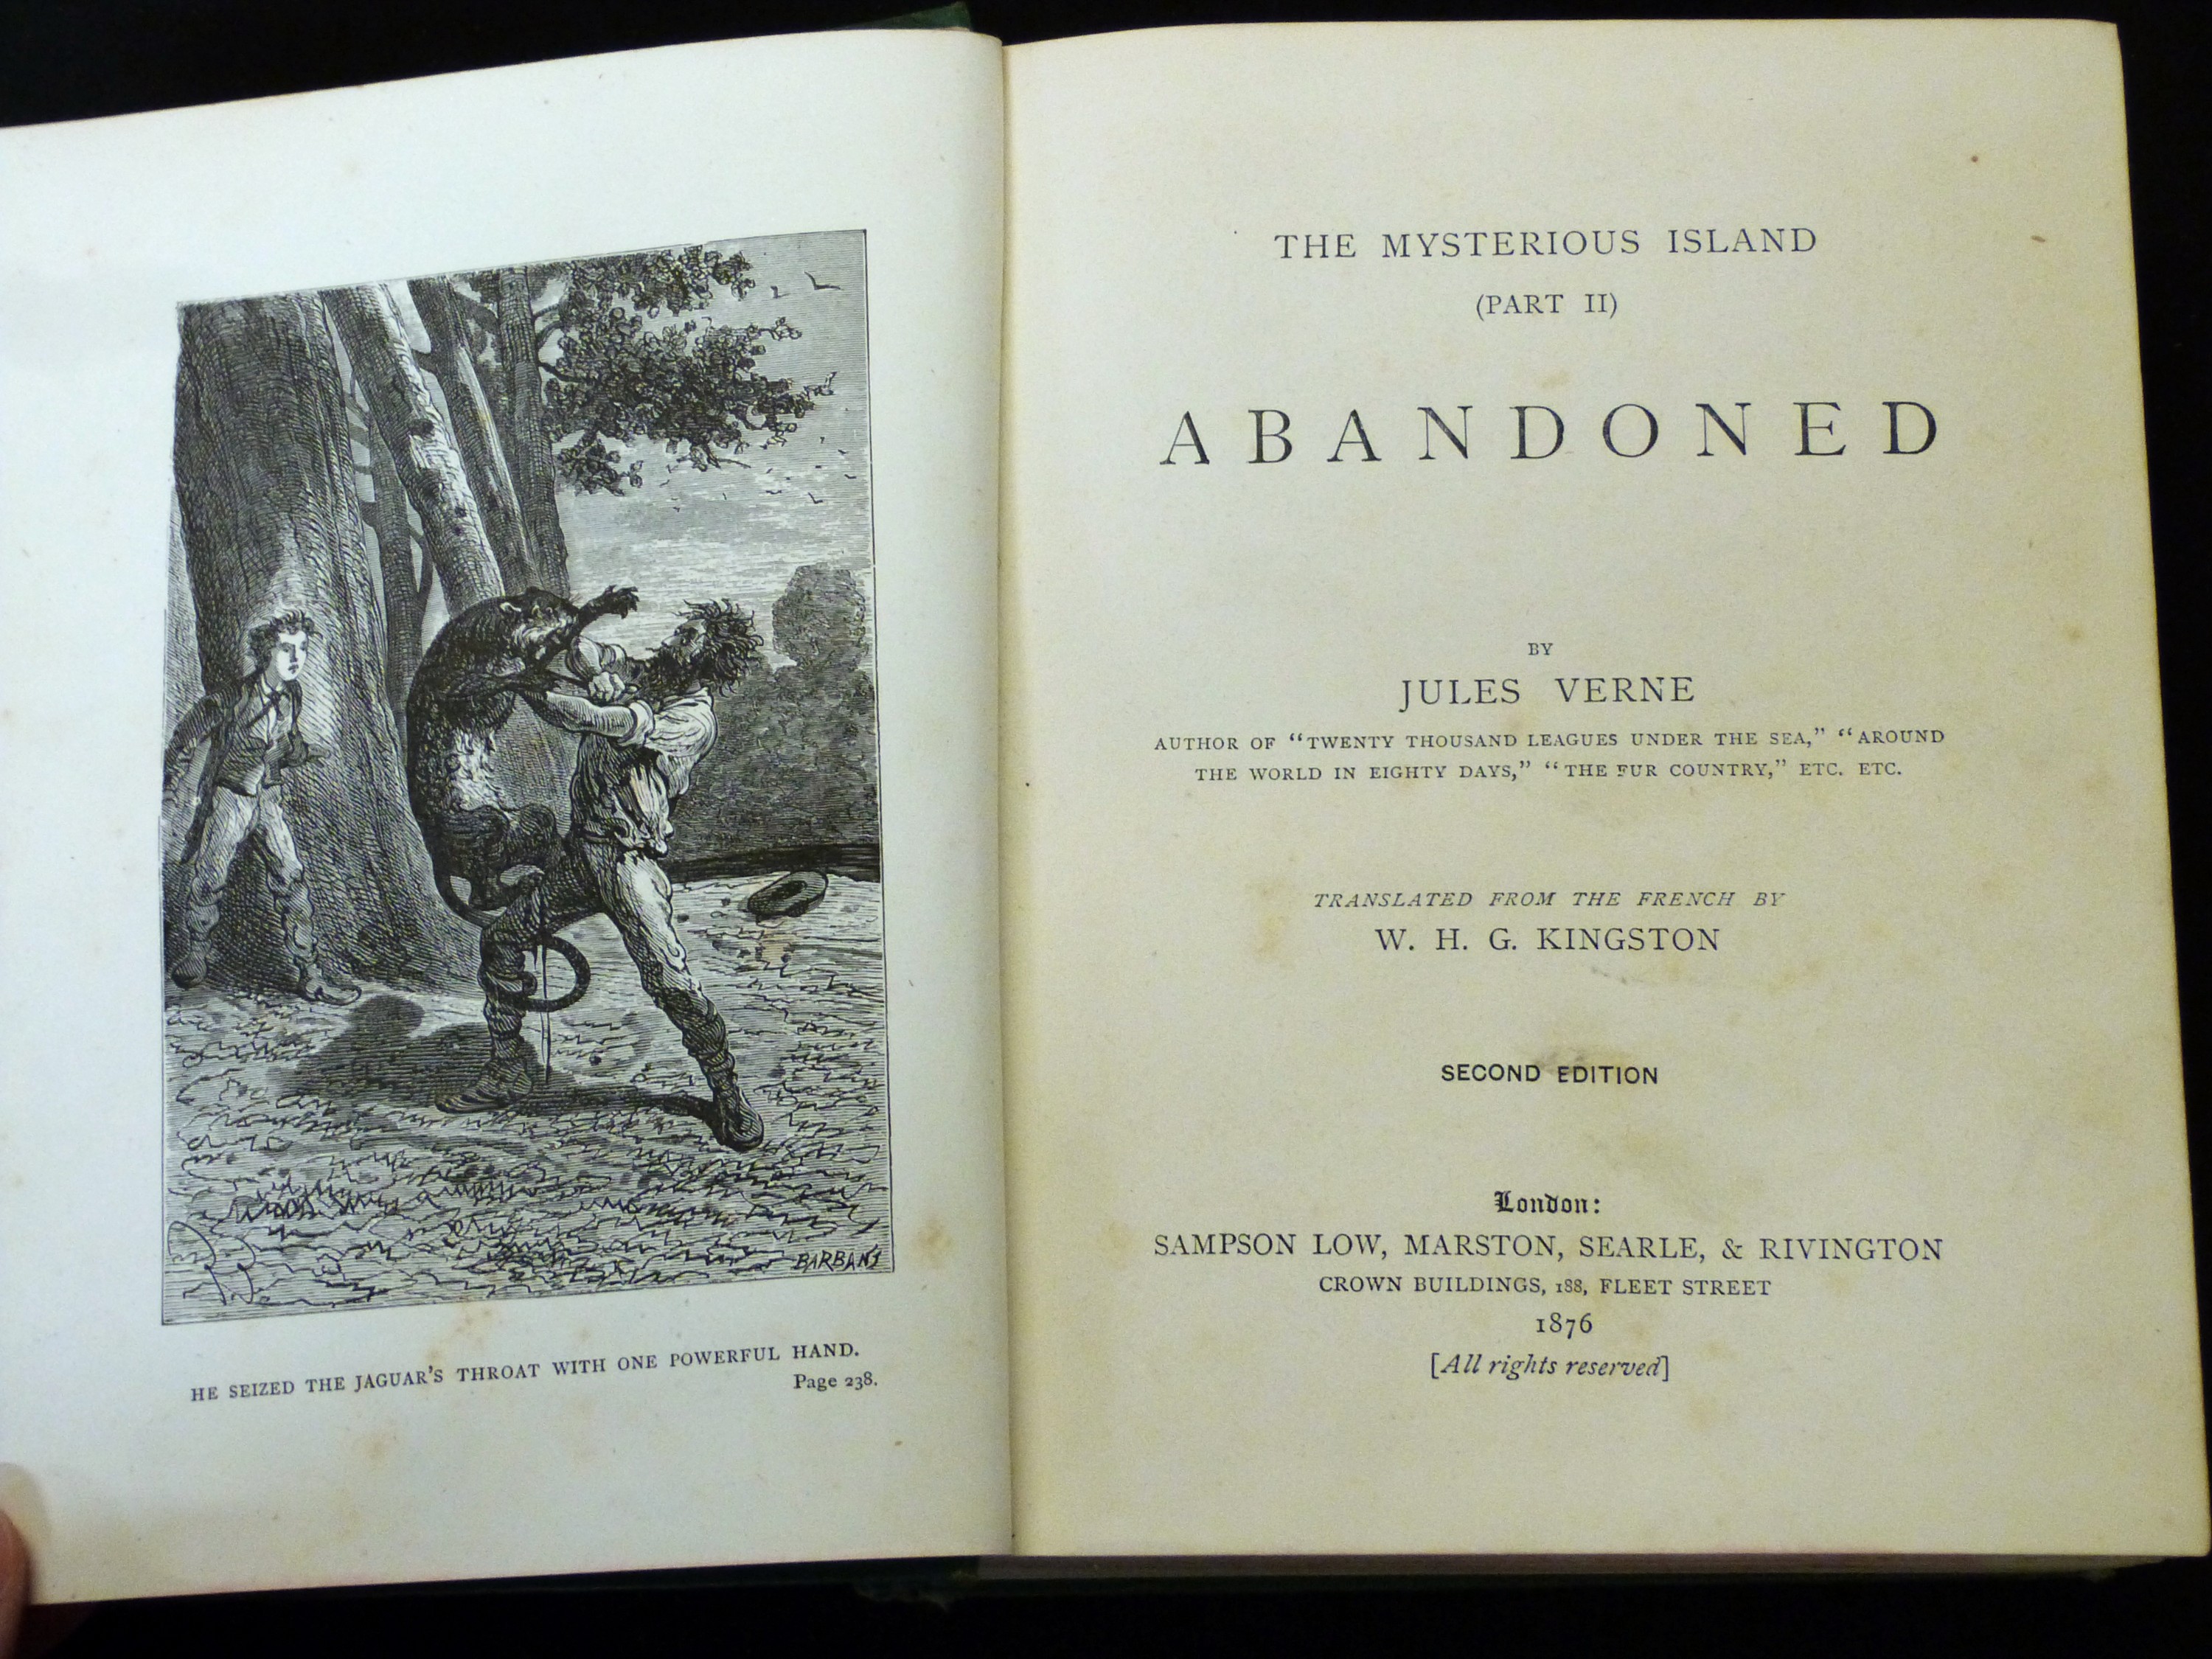 JULES VERNE: ABANDONED (THE MYSTERIOUS ISLAND PART II), trans W H G Kingston, London, Samson Low, - Image 2 of 3